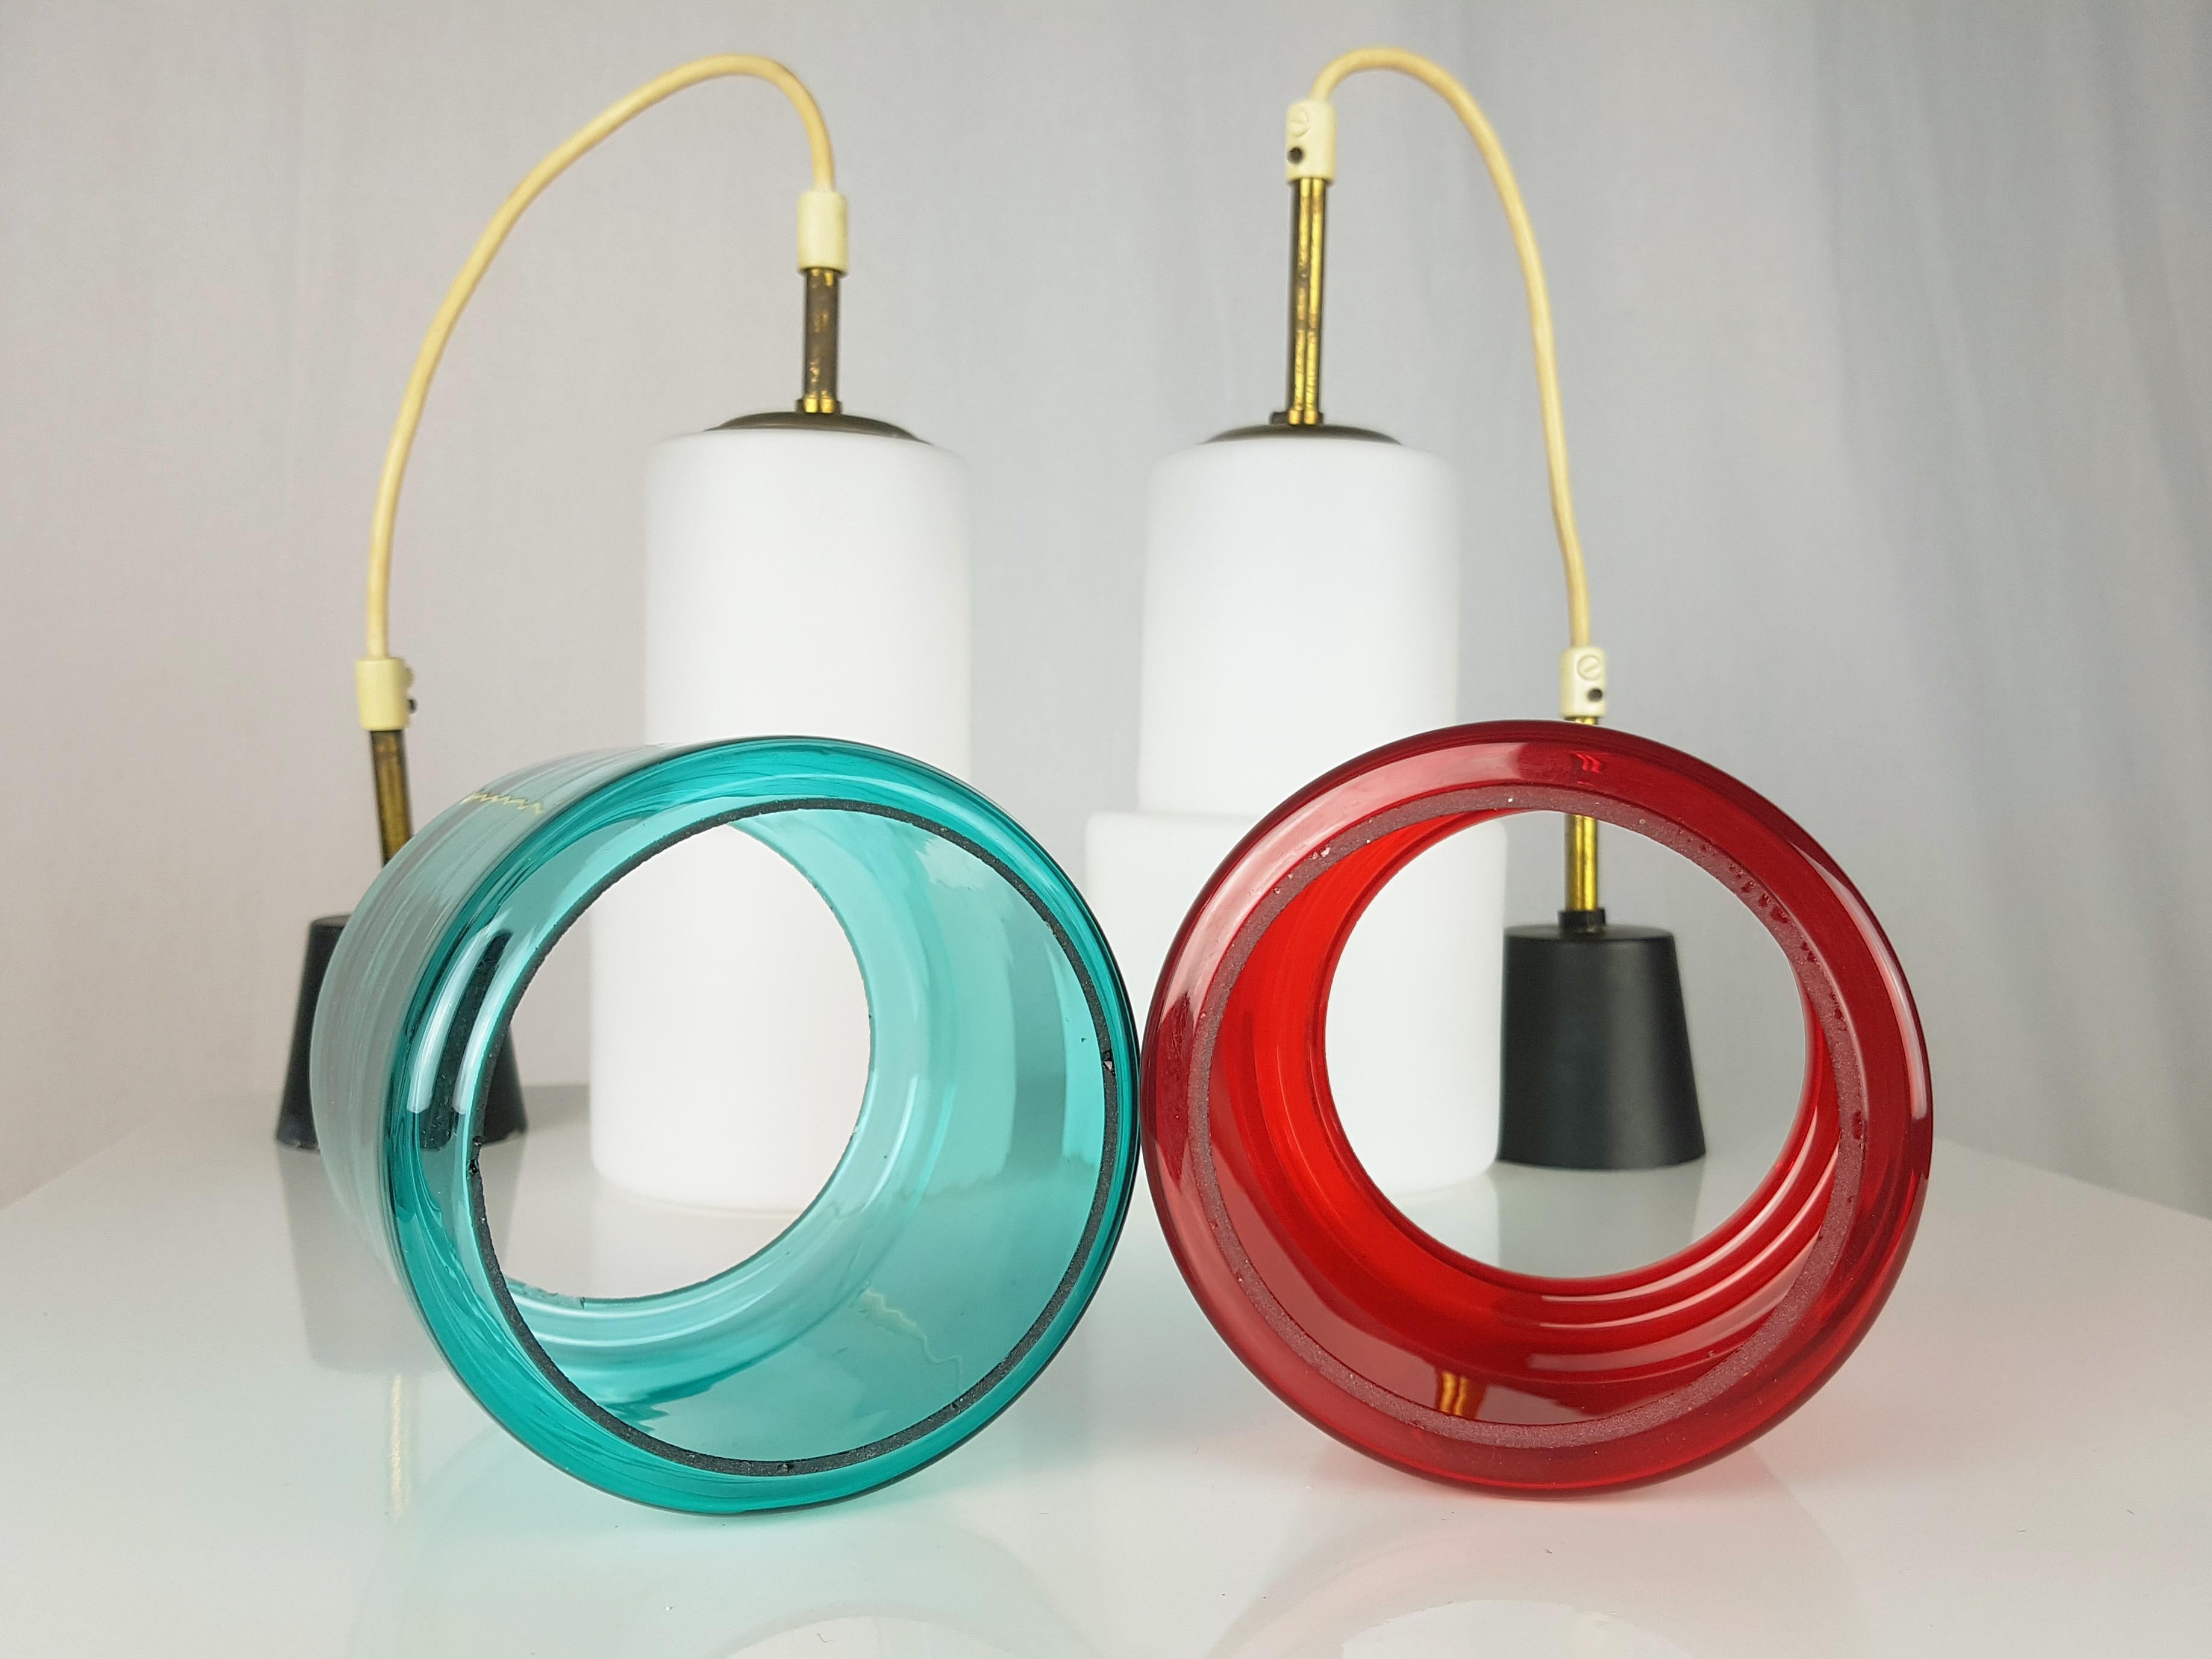 Brass & White, Azure & Red Glass Shades 1950s Pendant Lamps, Set of 2 For Sale 2